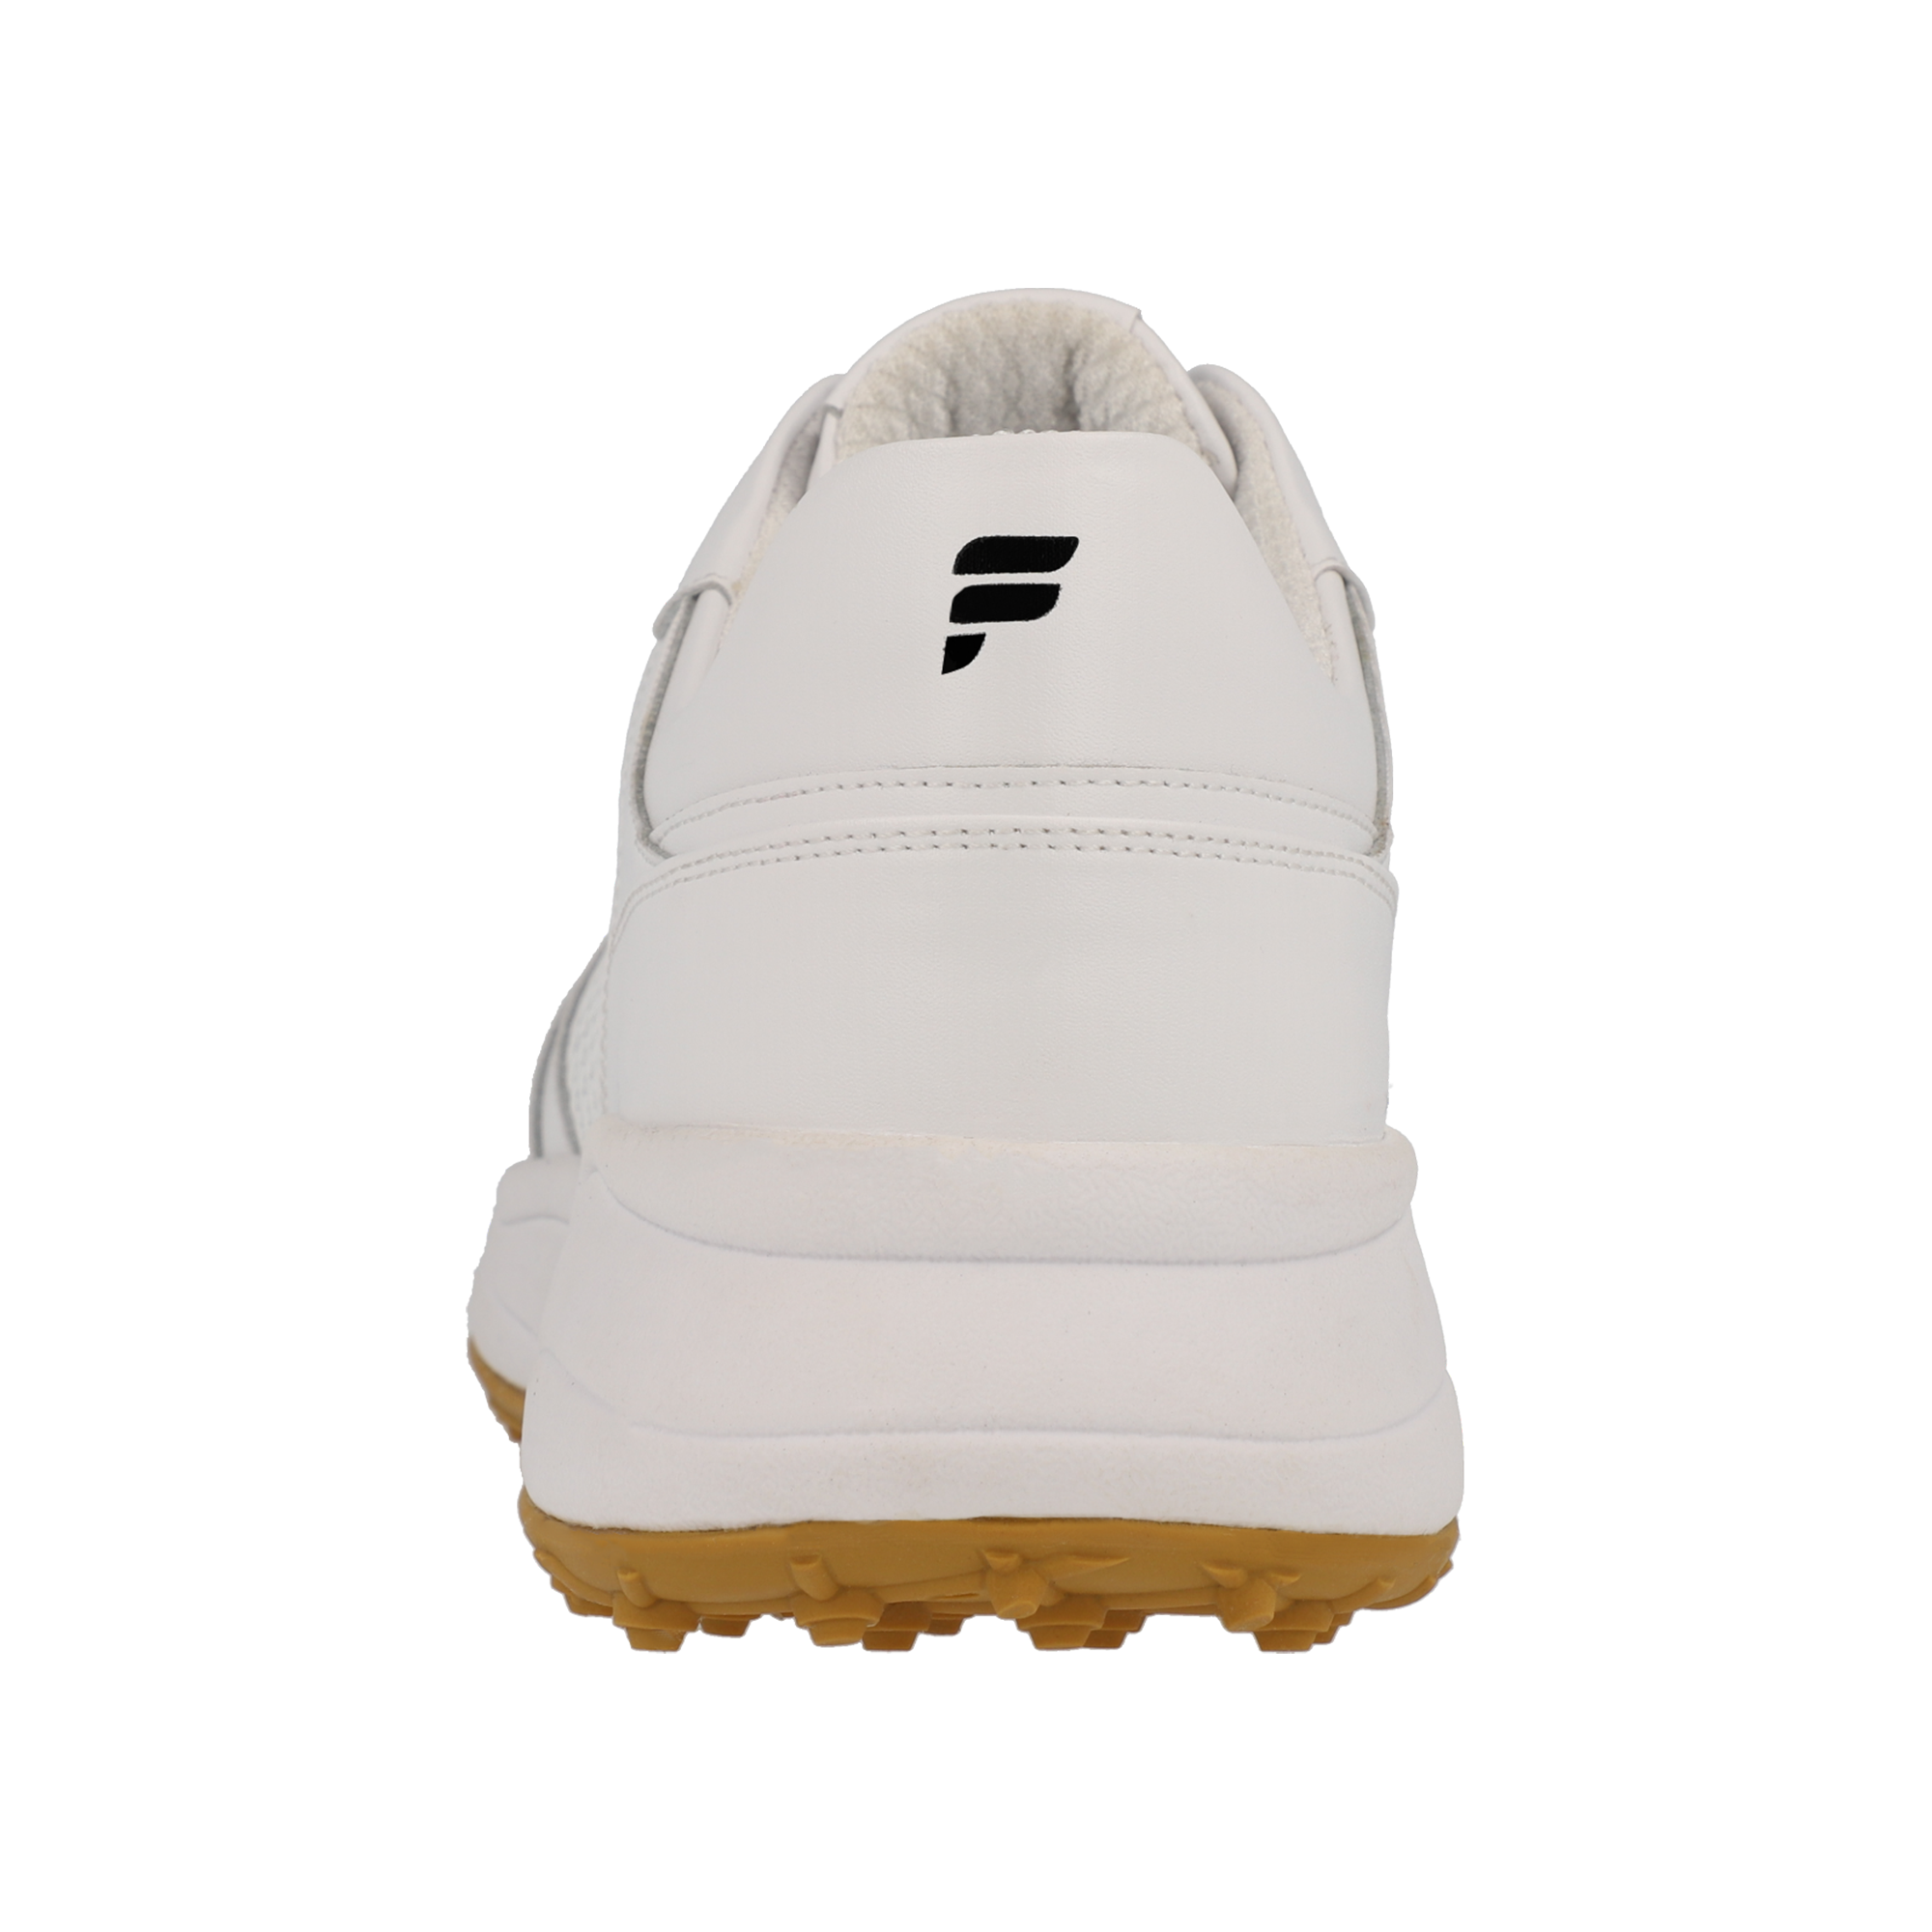 FITTEREST Spider Wave Golf Shoes for Women - FTR23 W SS WH202